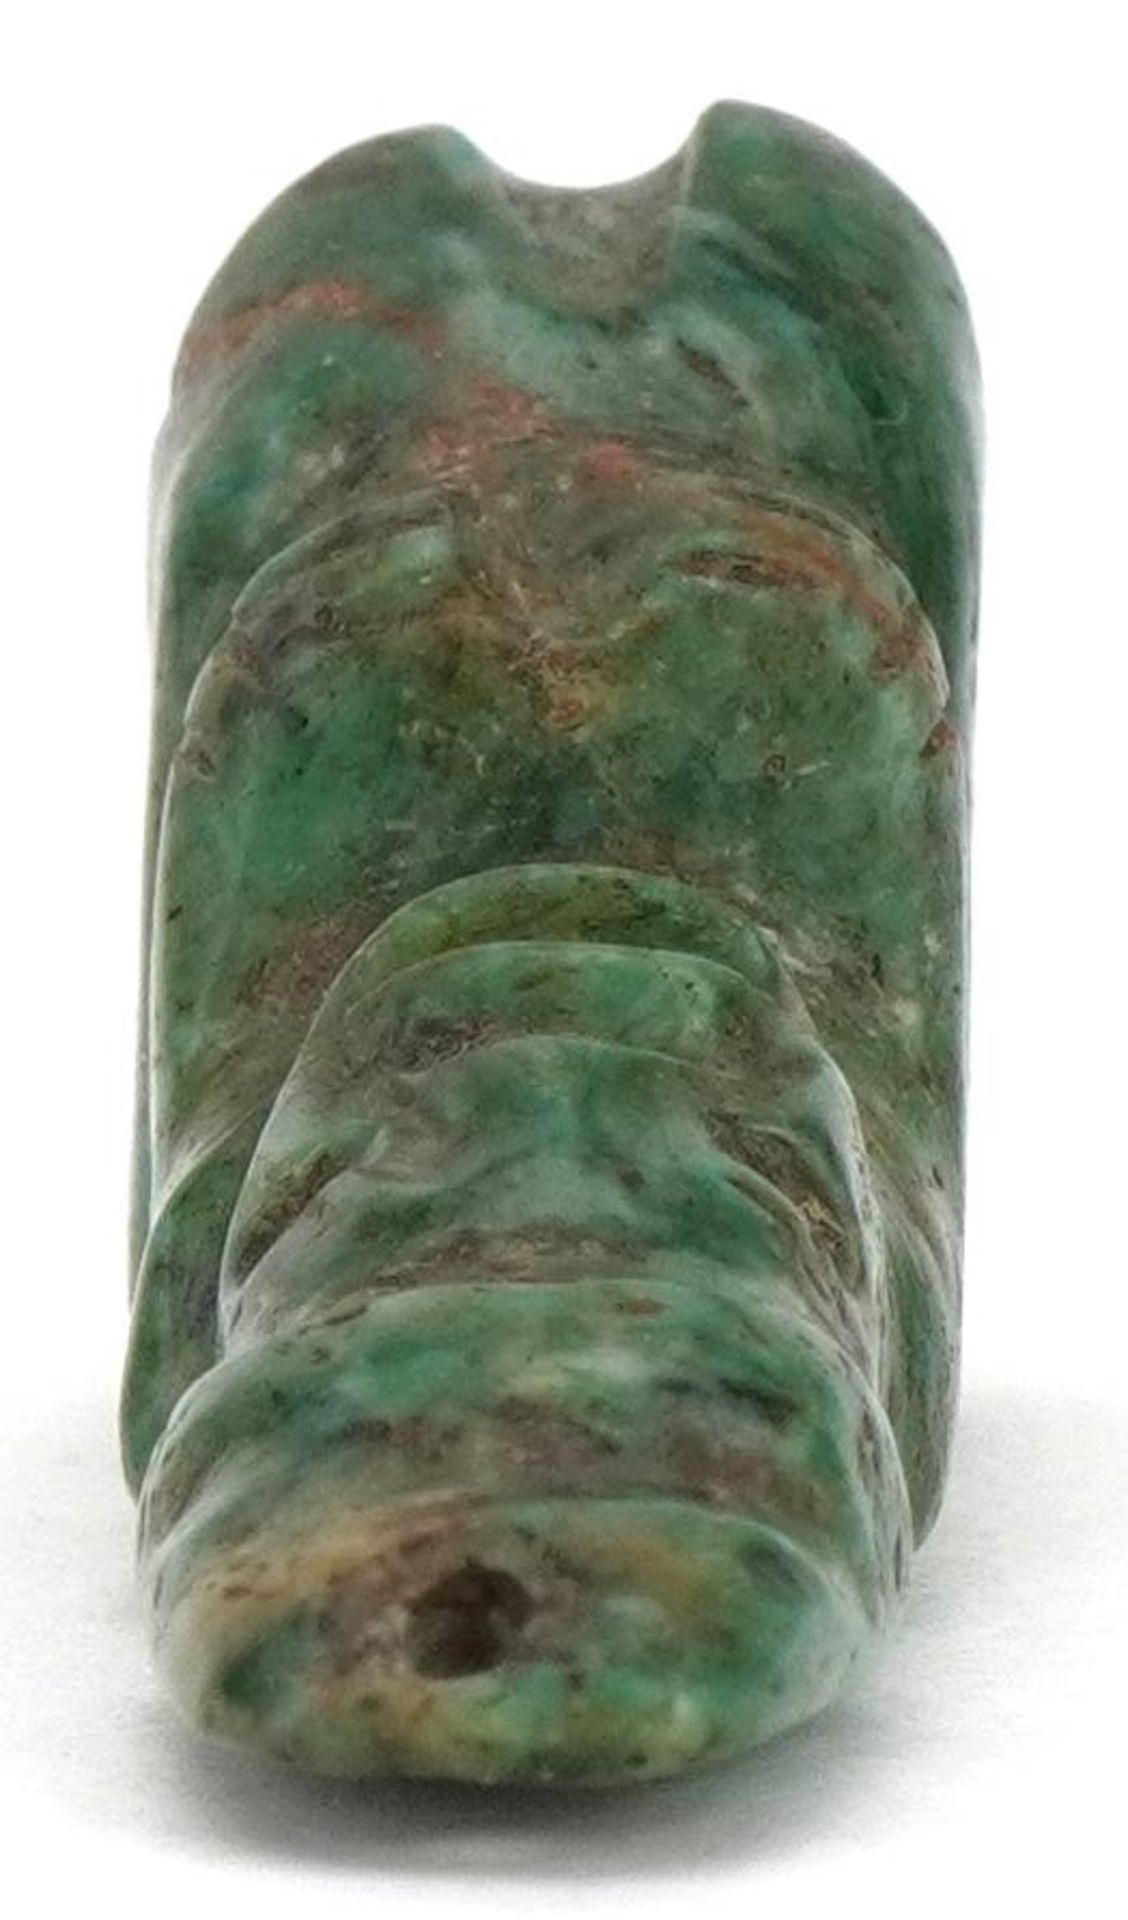 Tribal interest green hardstone figural pendant, probably Mayan or pre Columbian, 4.5cm high : For - Image 6 of 7